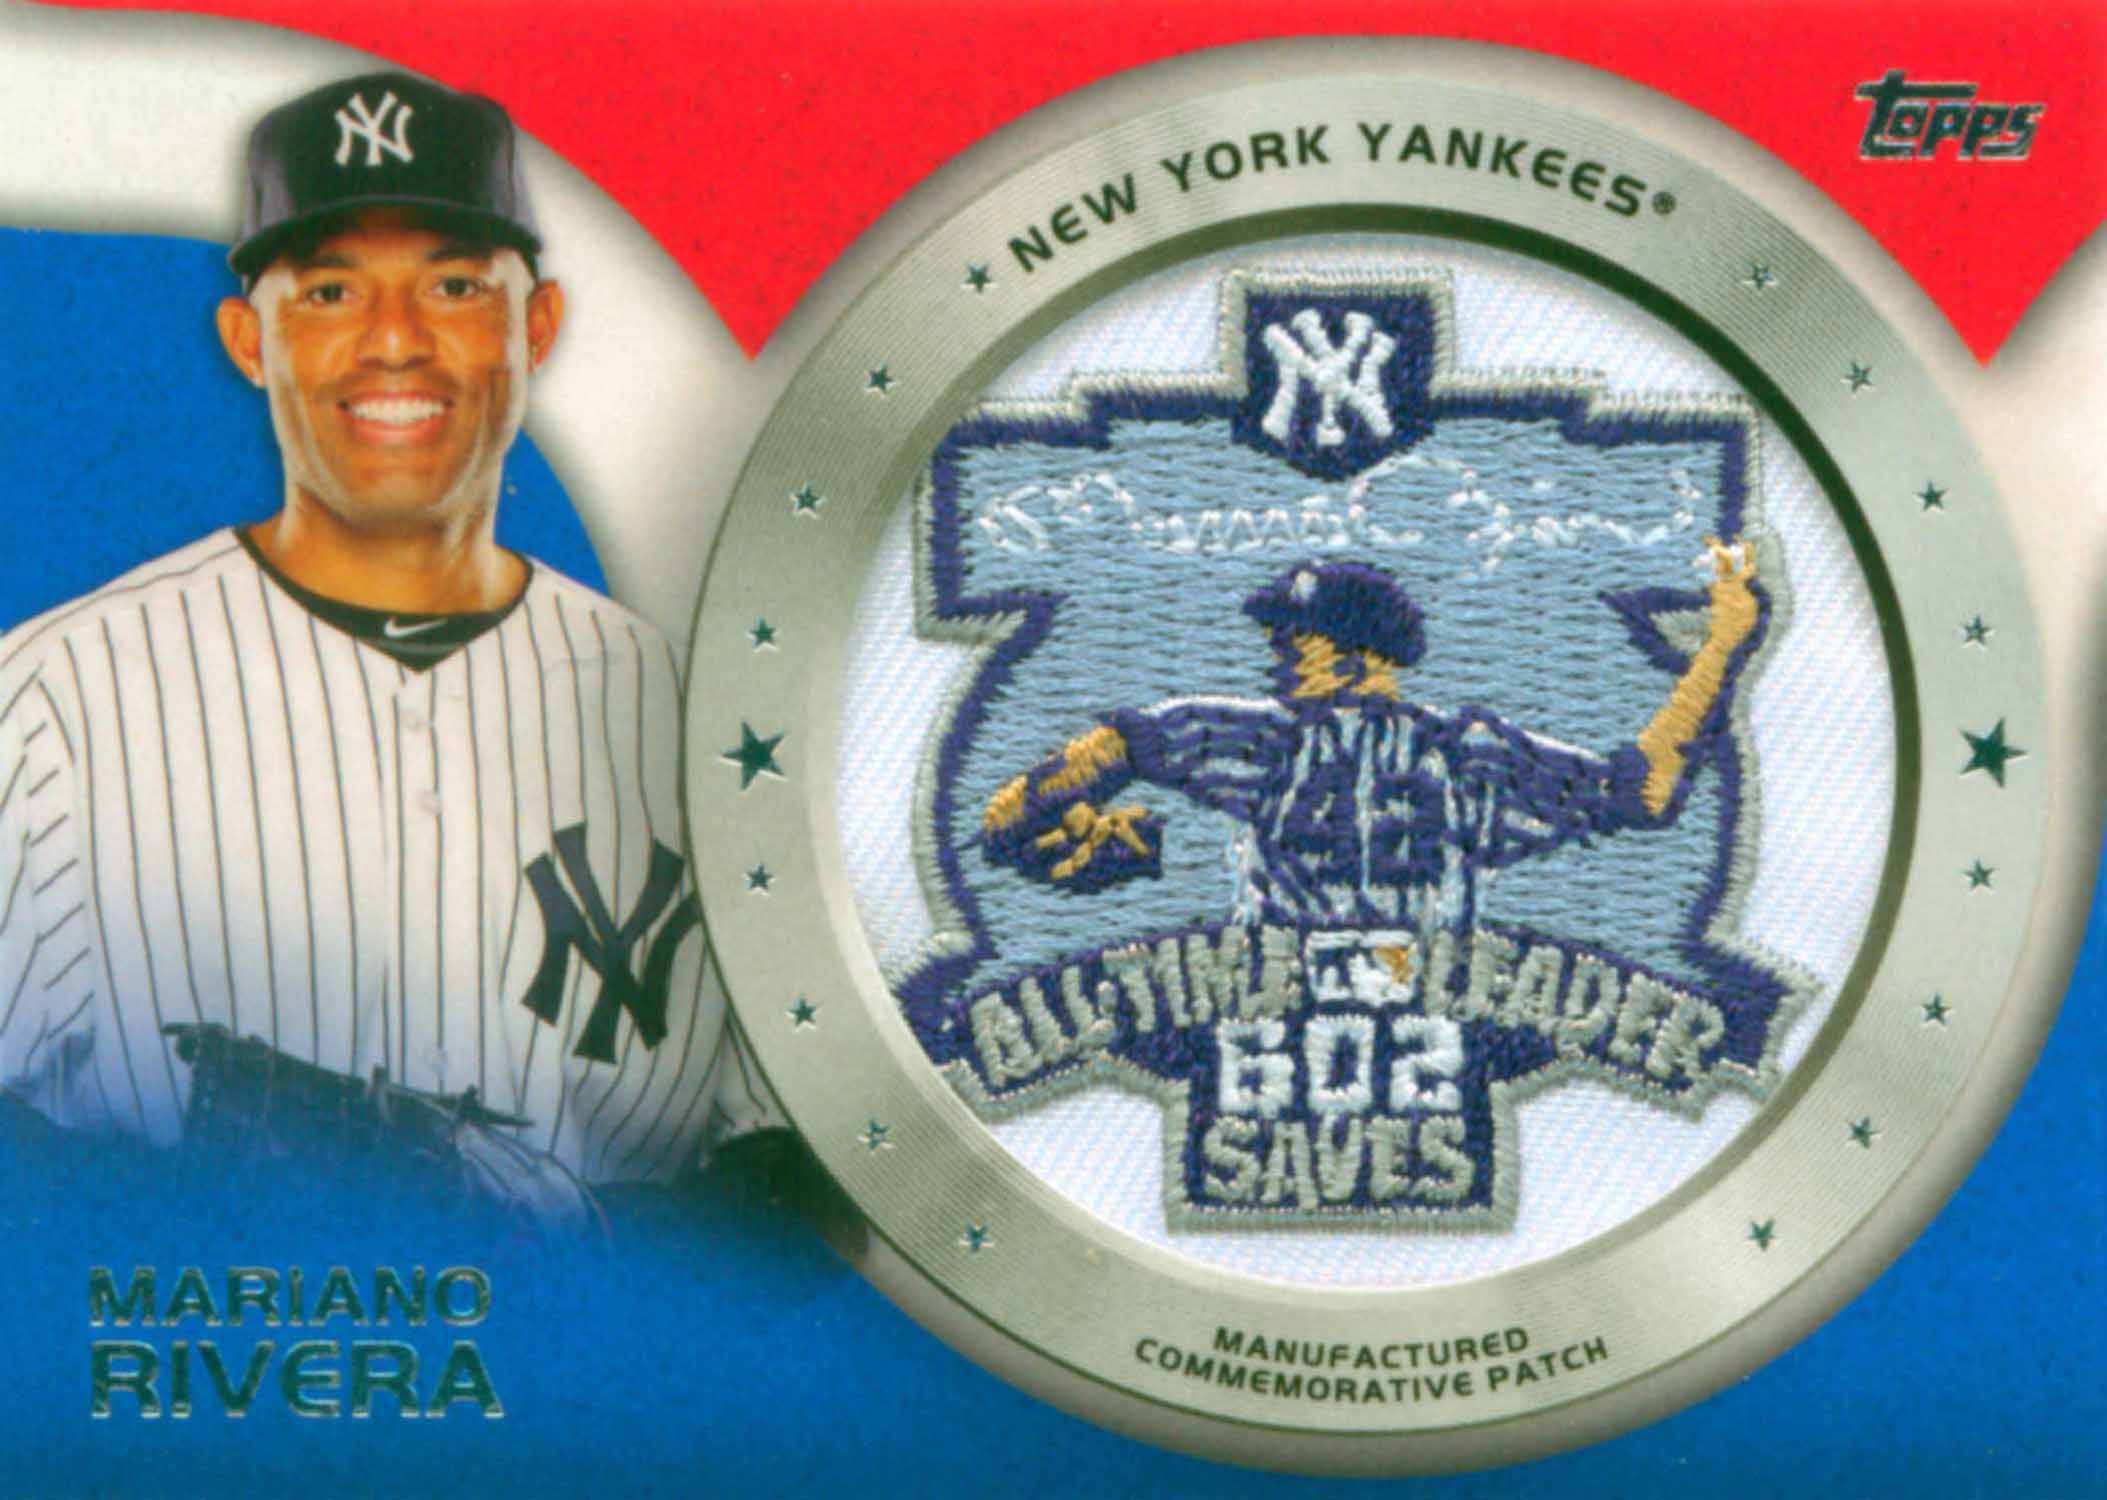 2014 Topps Manufactured Commemorative Team Logo Patch